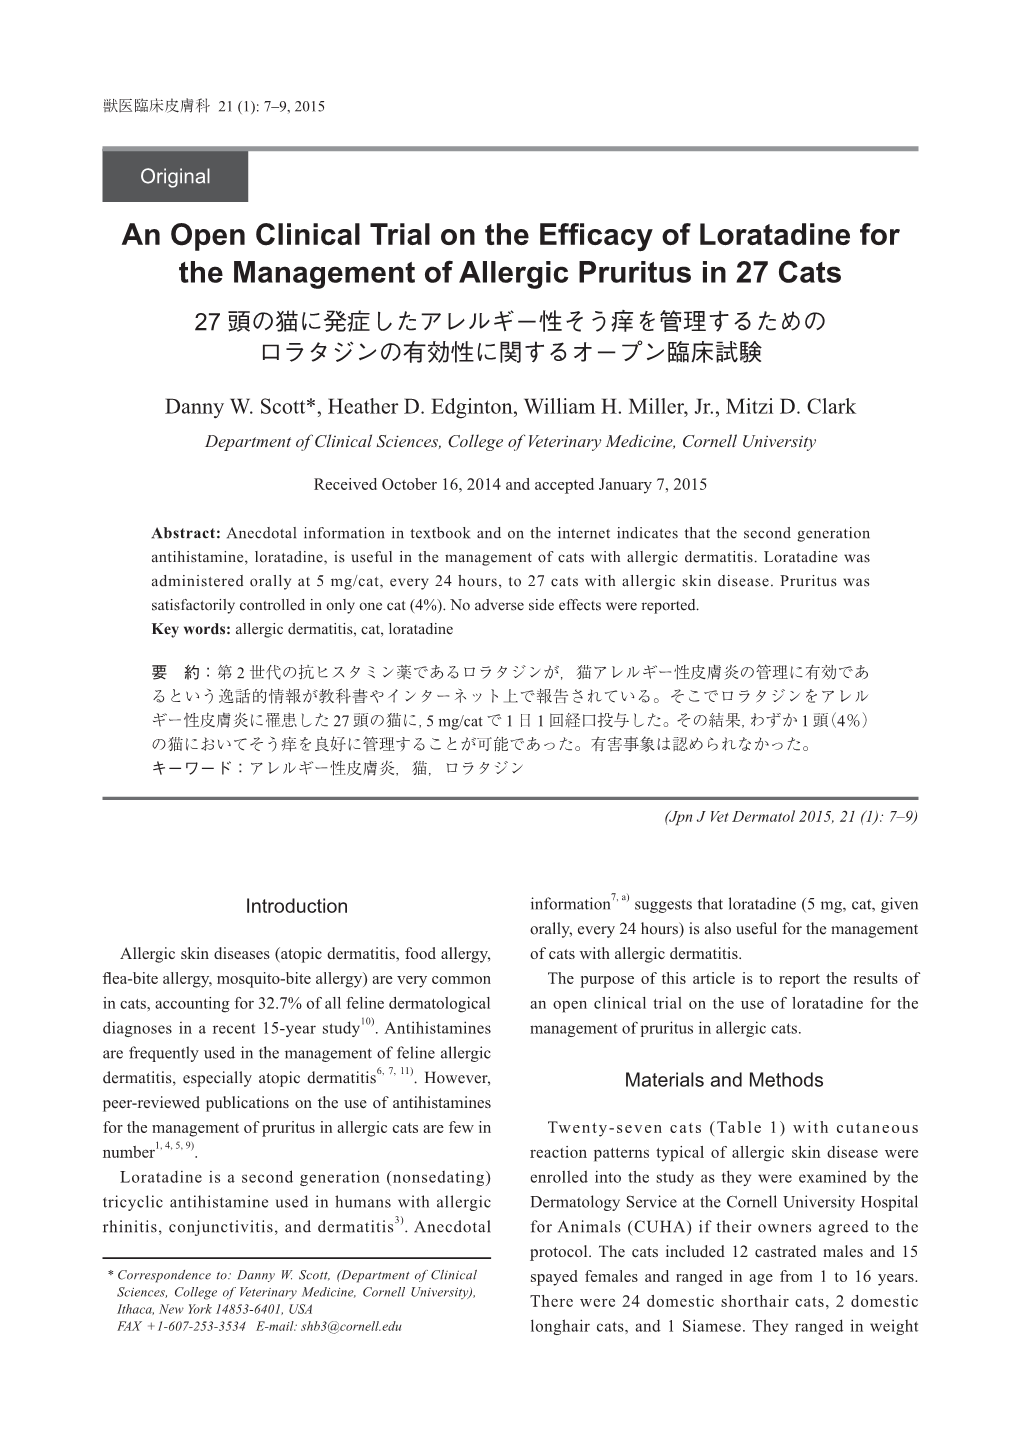 An Open Clinical Trial on the Efficacy of Loratadine for the Management of Allergic Pruritus in 27 Cats 27 頭の猫に発症したアレルギー性そう痒を管理するための ロラタジンの有効性に関するオープン臨床試験